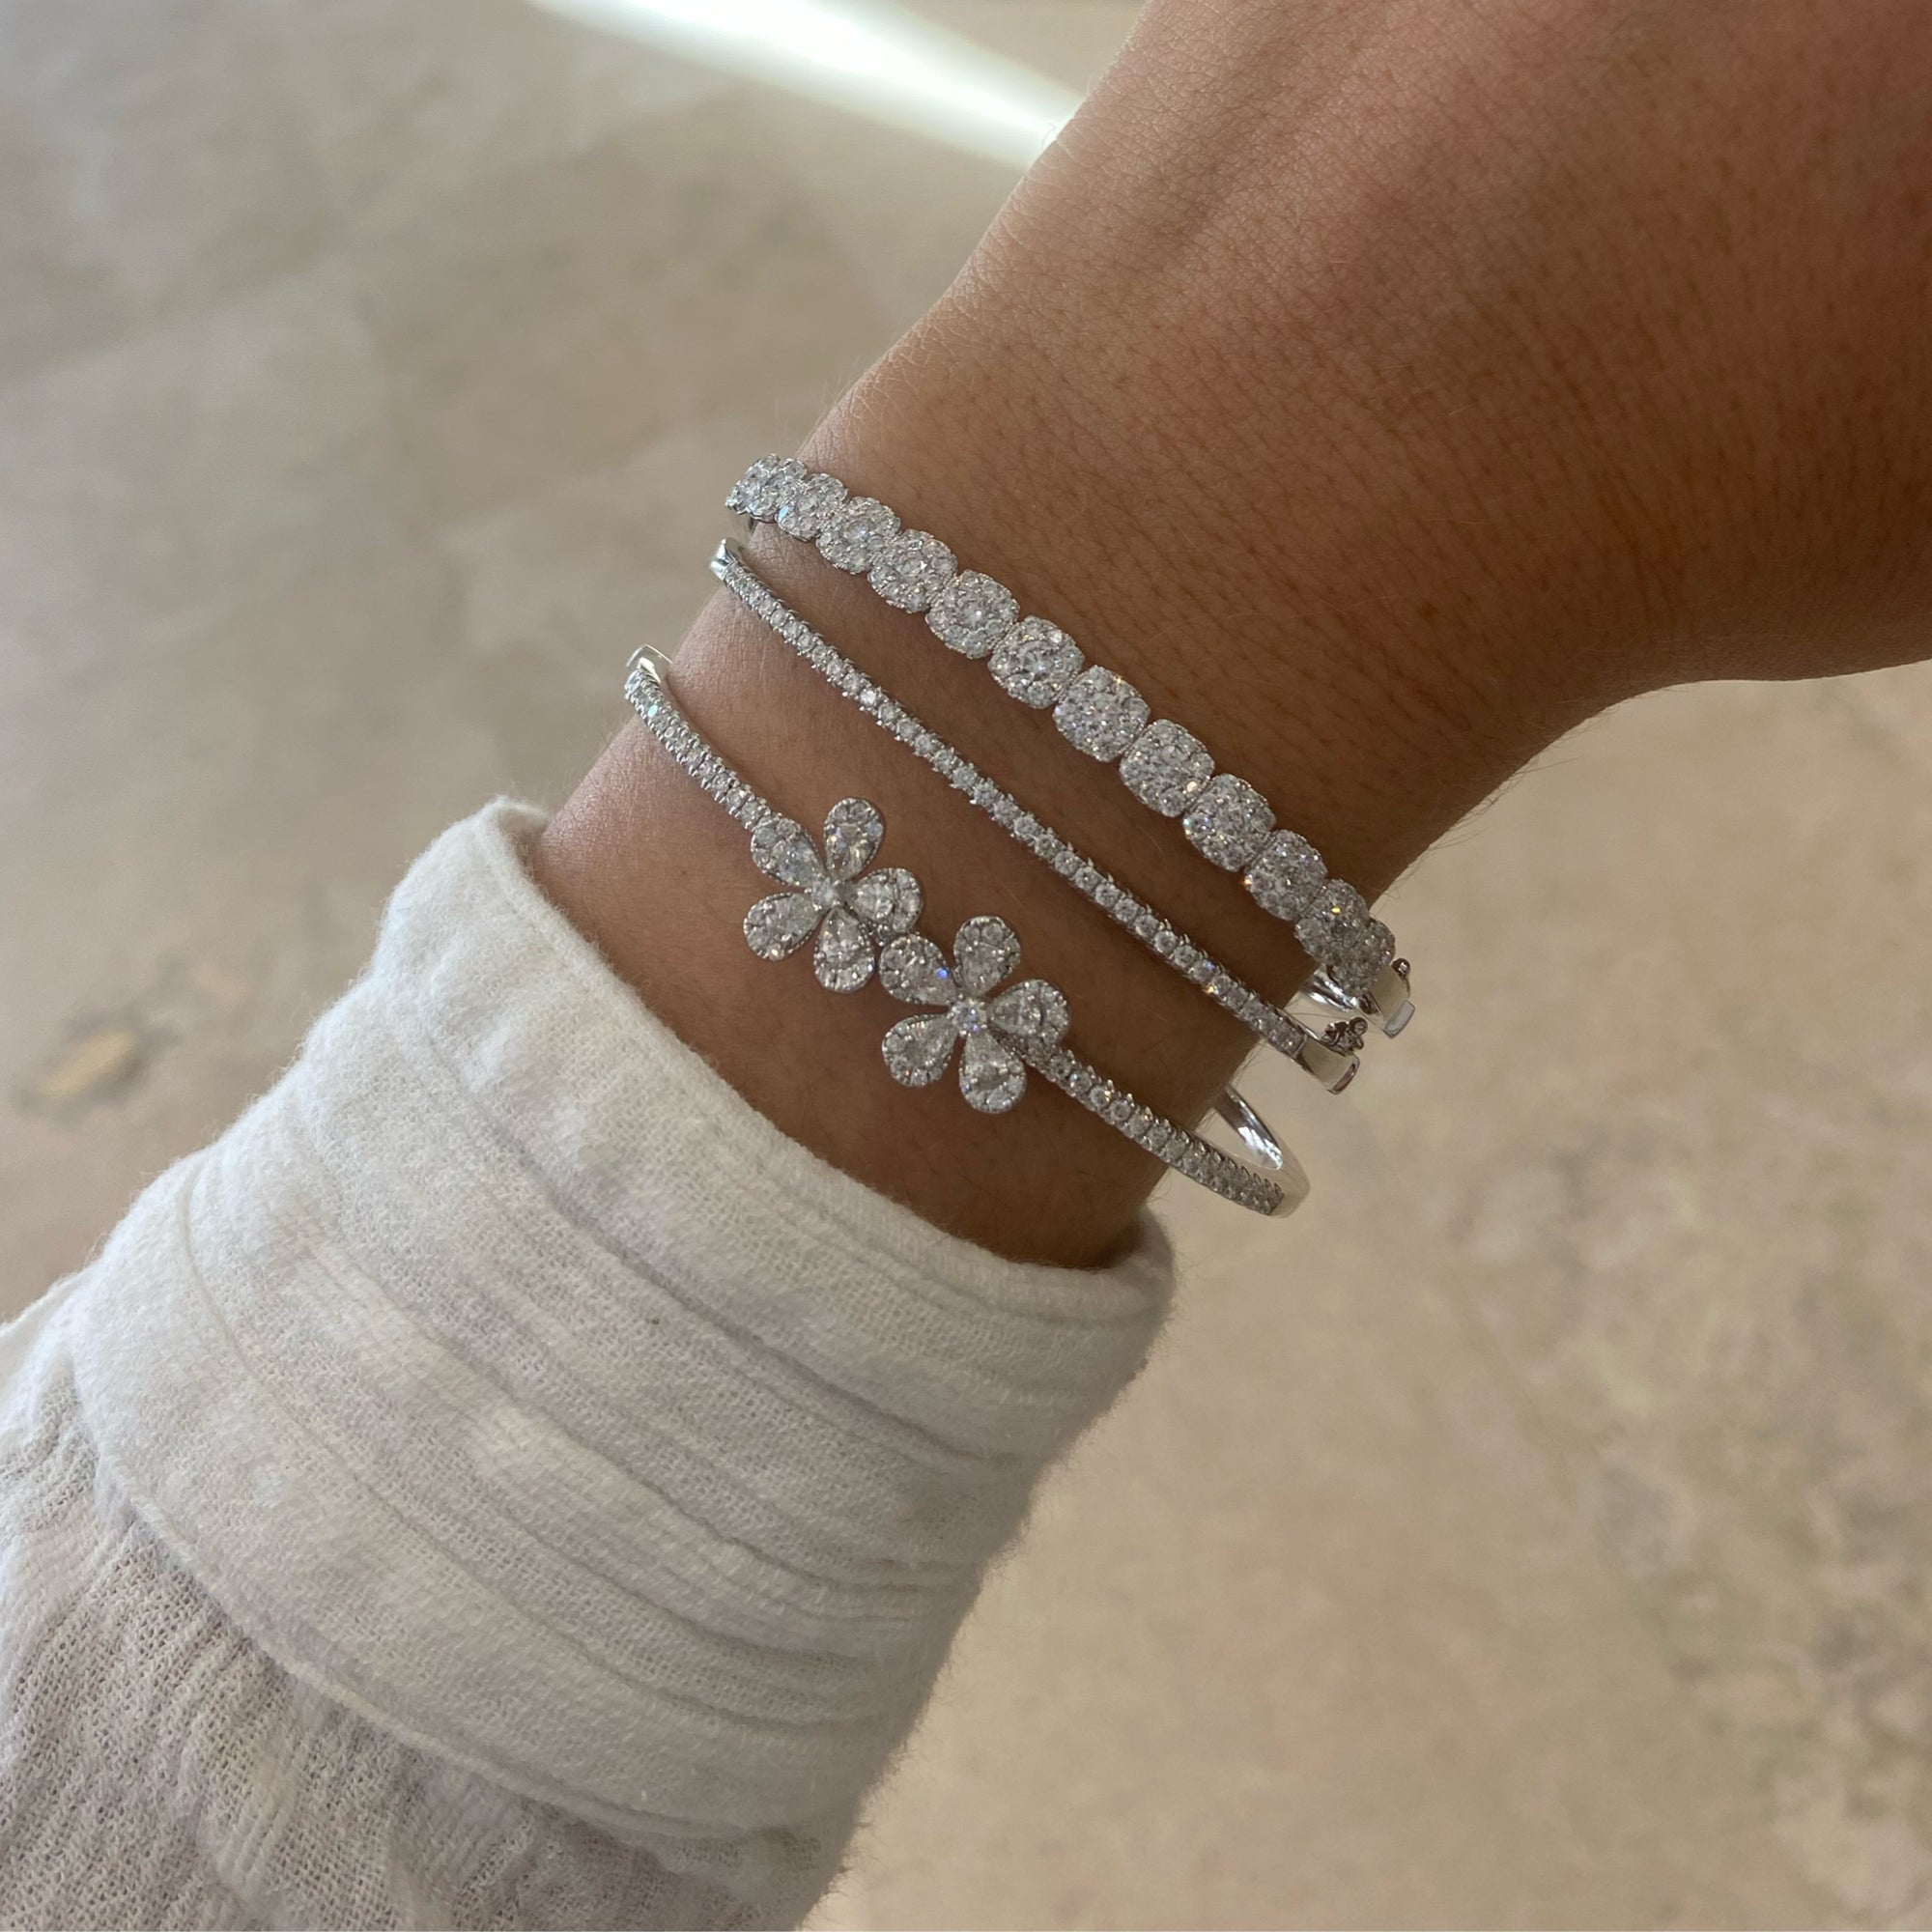 Solid 18K white gold weighing 12.93 grams featuring 104 round diamonds weighing 1.58 carats and 13 round diamonds weighing 0.99 carats Halo Diamond Bangle Bracelet | Nuha Jewelers